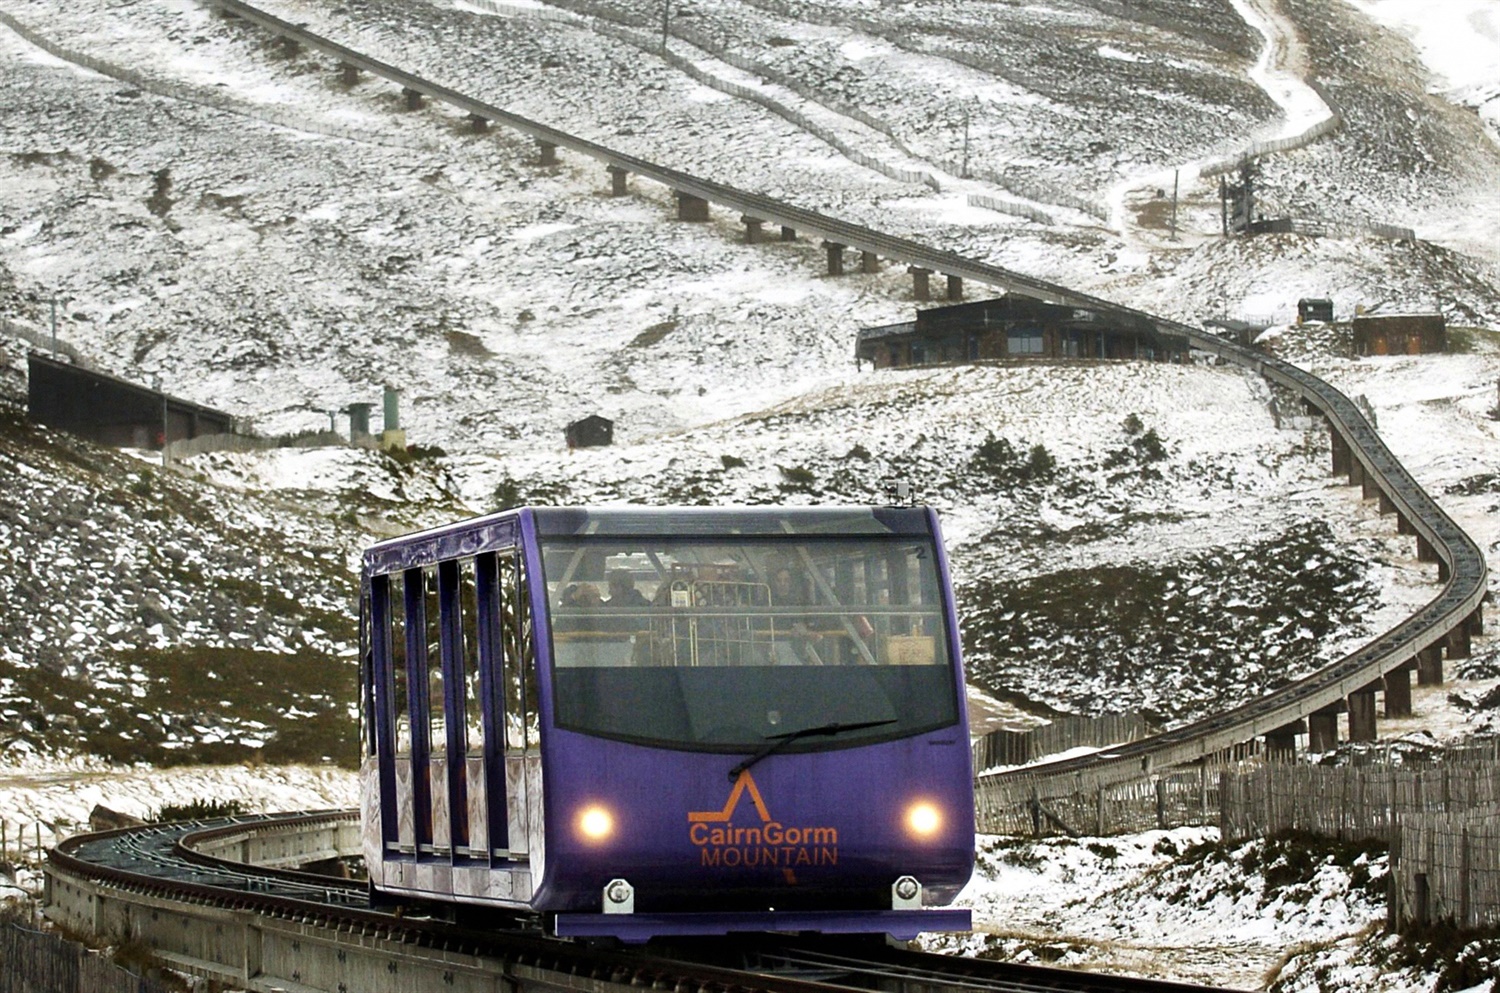 Cairngorm funicular report into UK’s highest railway delayed again